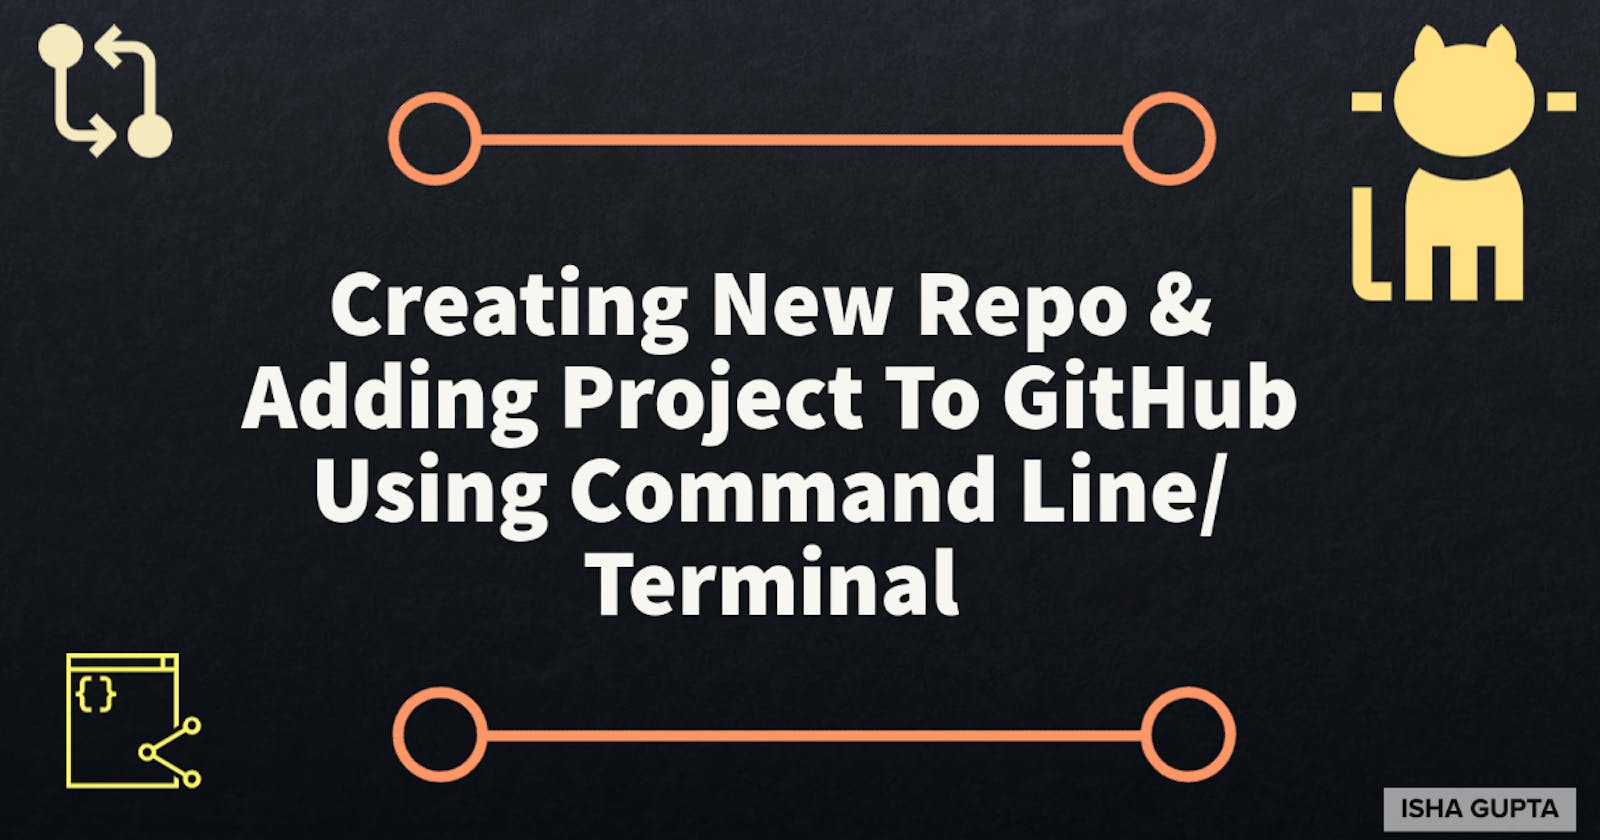 Creating New Repo & Adding Project To GitHub Using Command Line/ Terminal